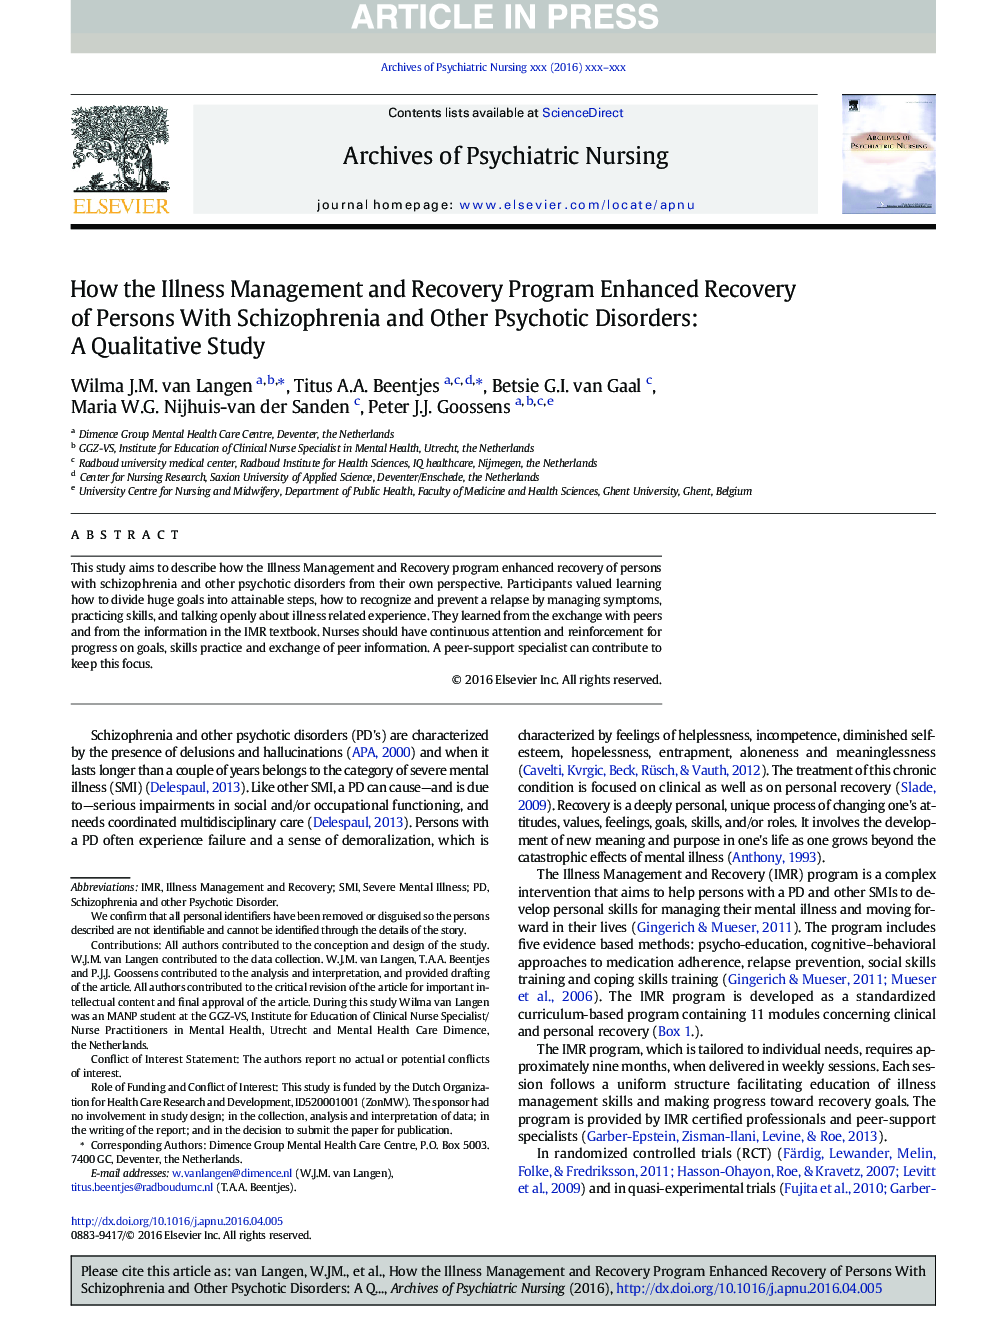 How the Illness Management and Recovery Program Enhanced Recovery of Persons With Schizophrenia and Other Psychotic Disorders: A Qualitative Study